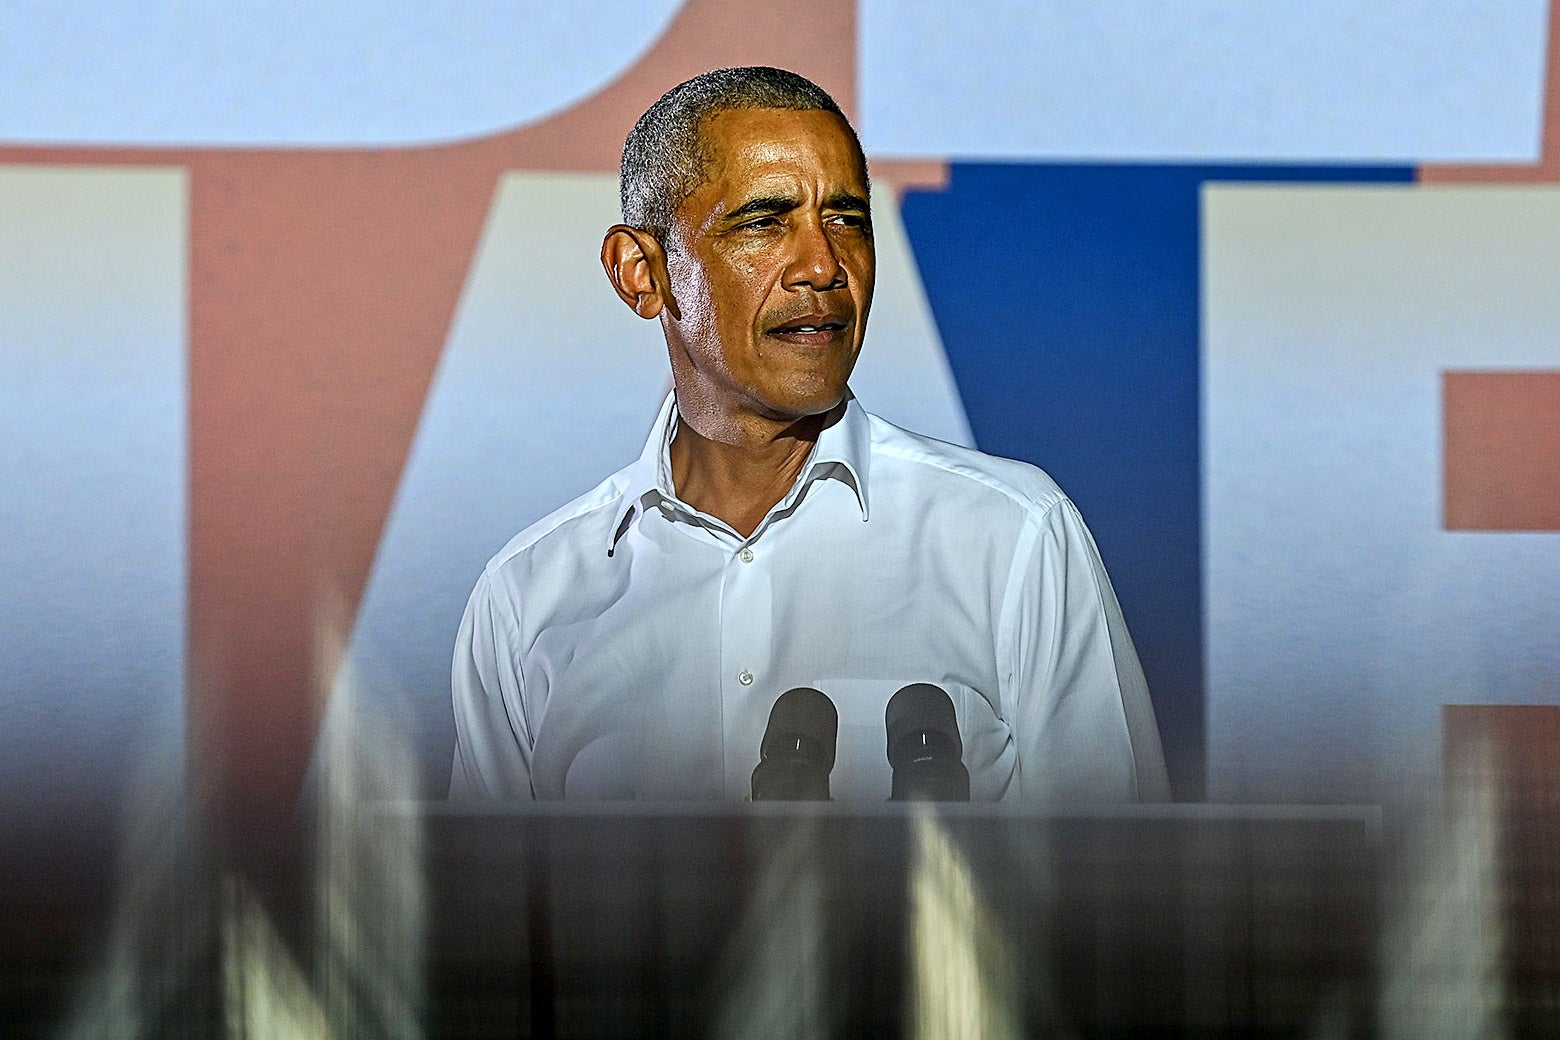 Barack Obama in a white button down, looking to the side.